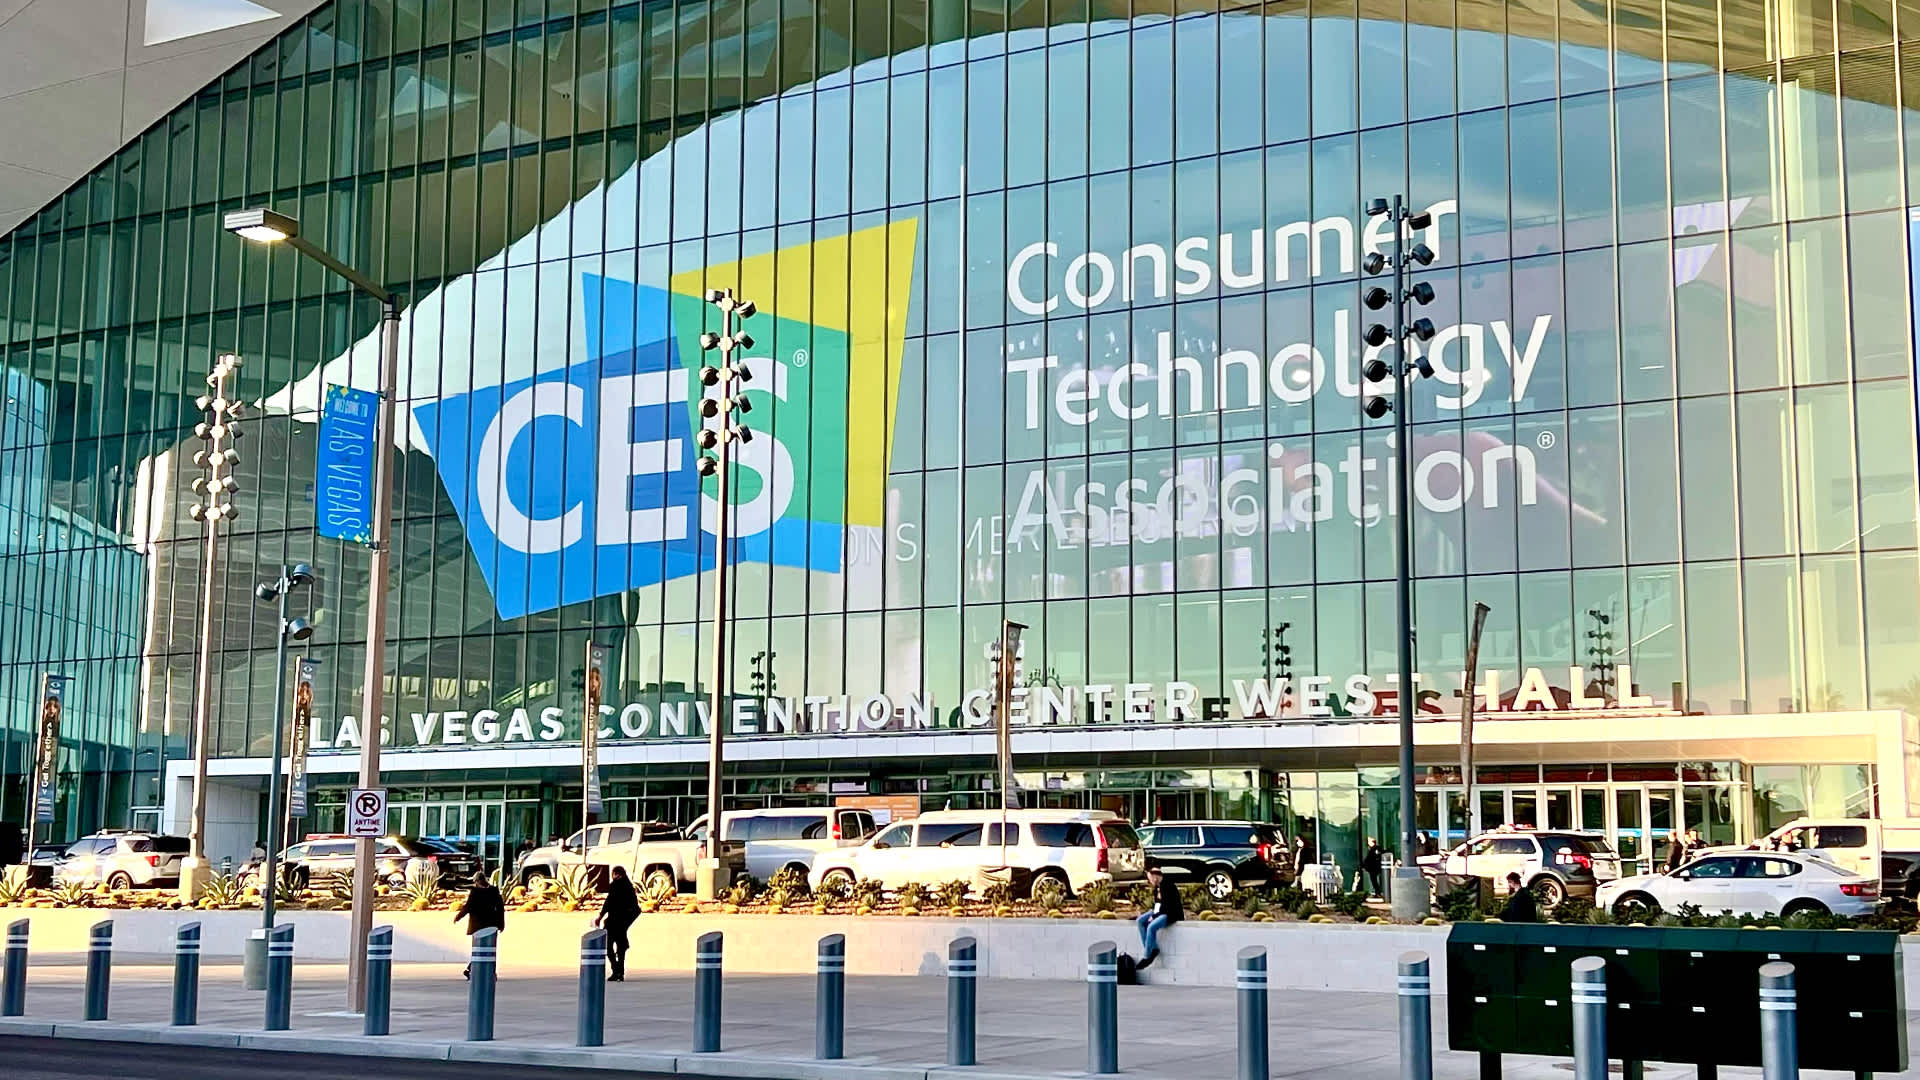 CES 2023 banner at the entrance of the Las Vegas Convention Center in Las Vegas, Nevada. Credit: Jason Tanz/Lyft